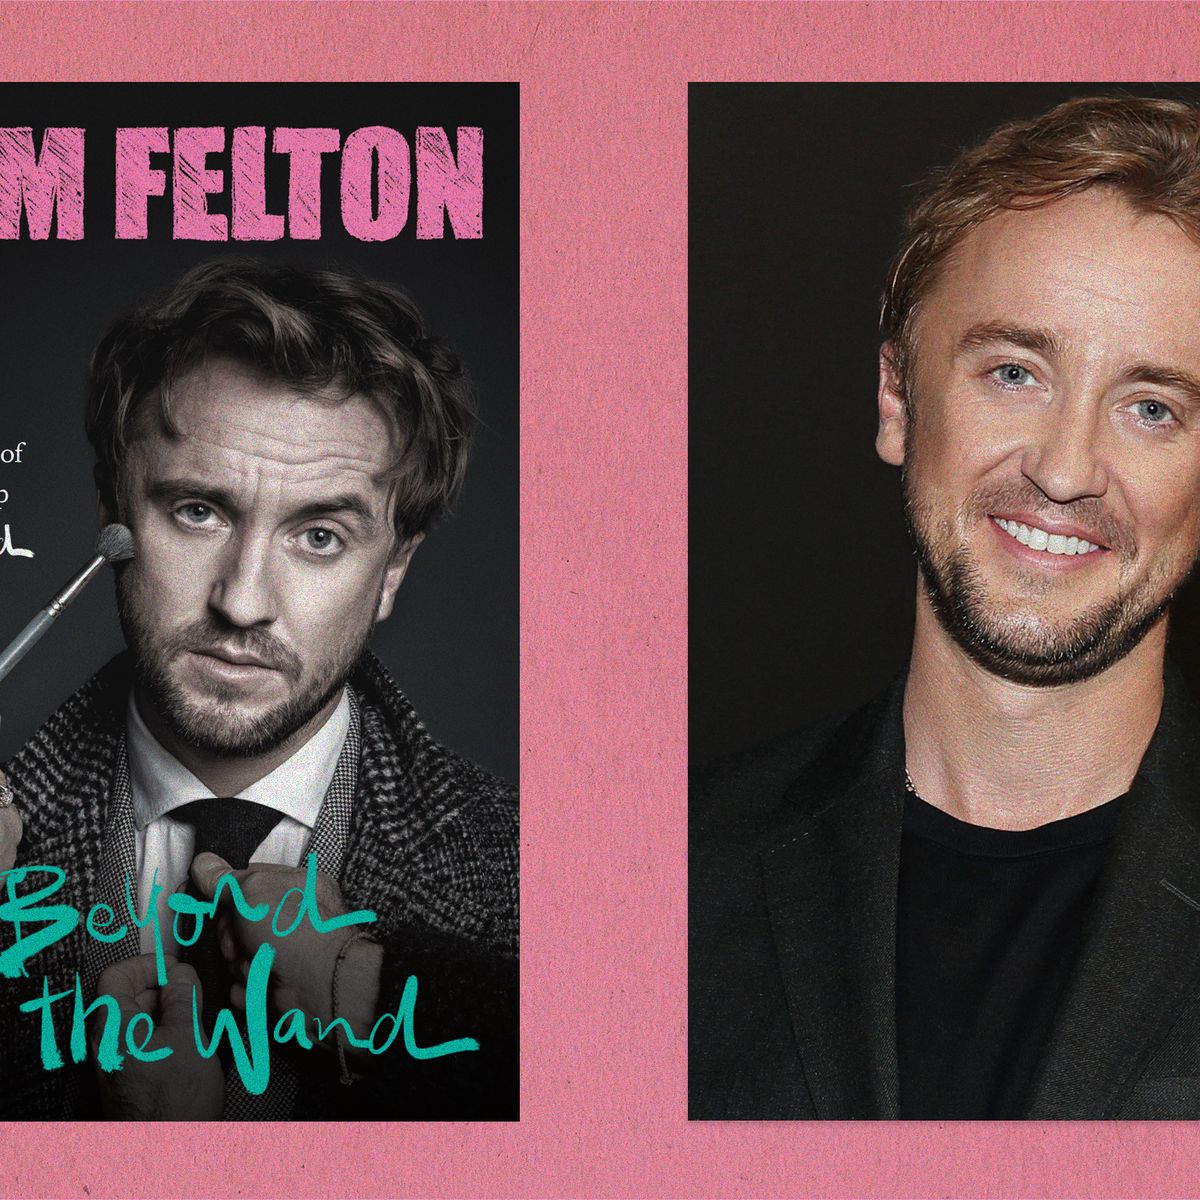 Tom Felton Explores Struggles With Fame, Friendships With 'H.P.